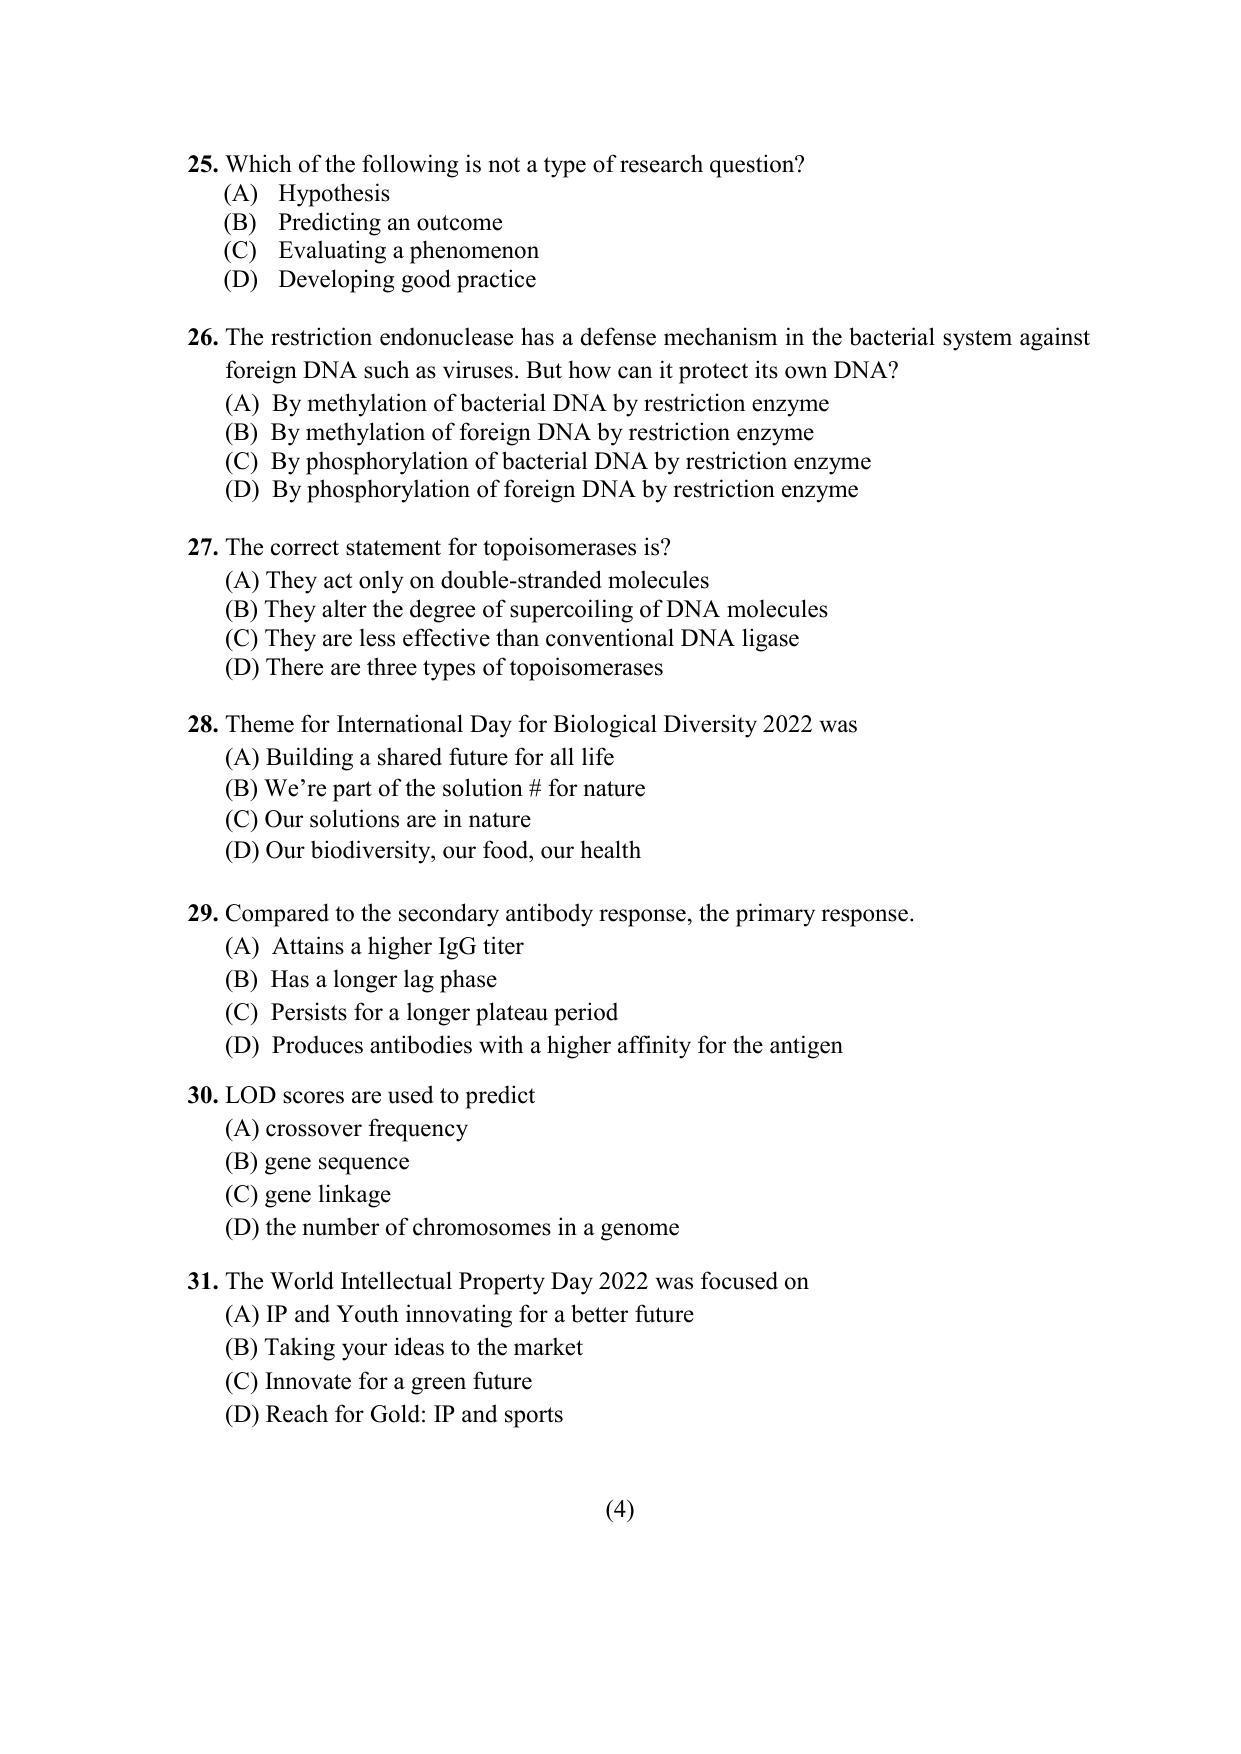 PU MPET Anthropology 2022 Question Papers - Page 45